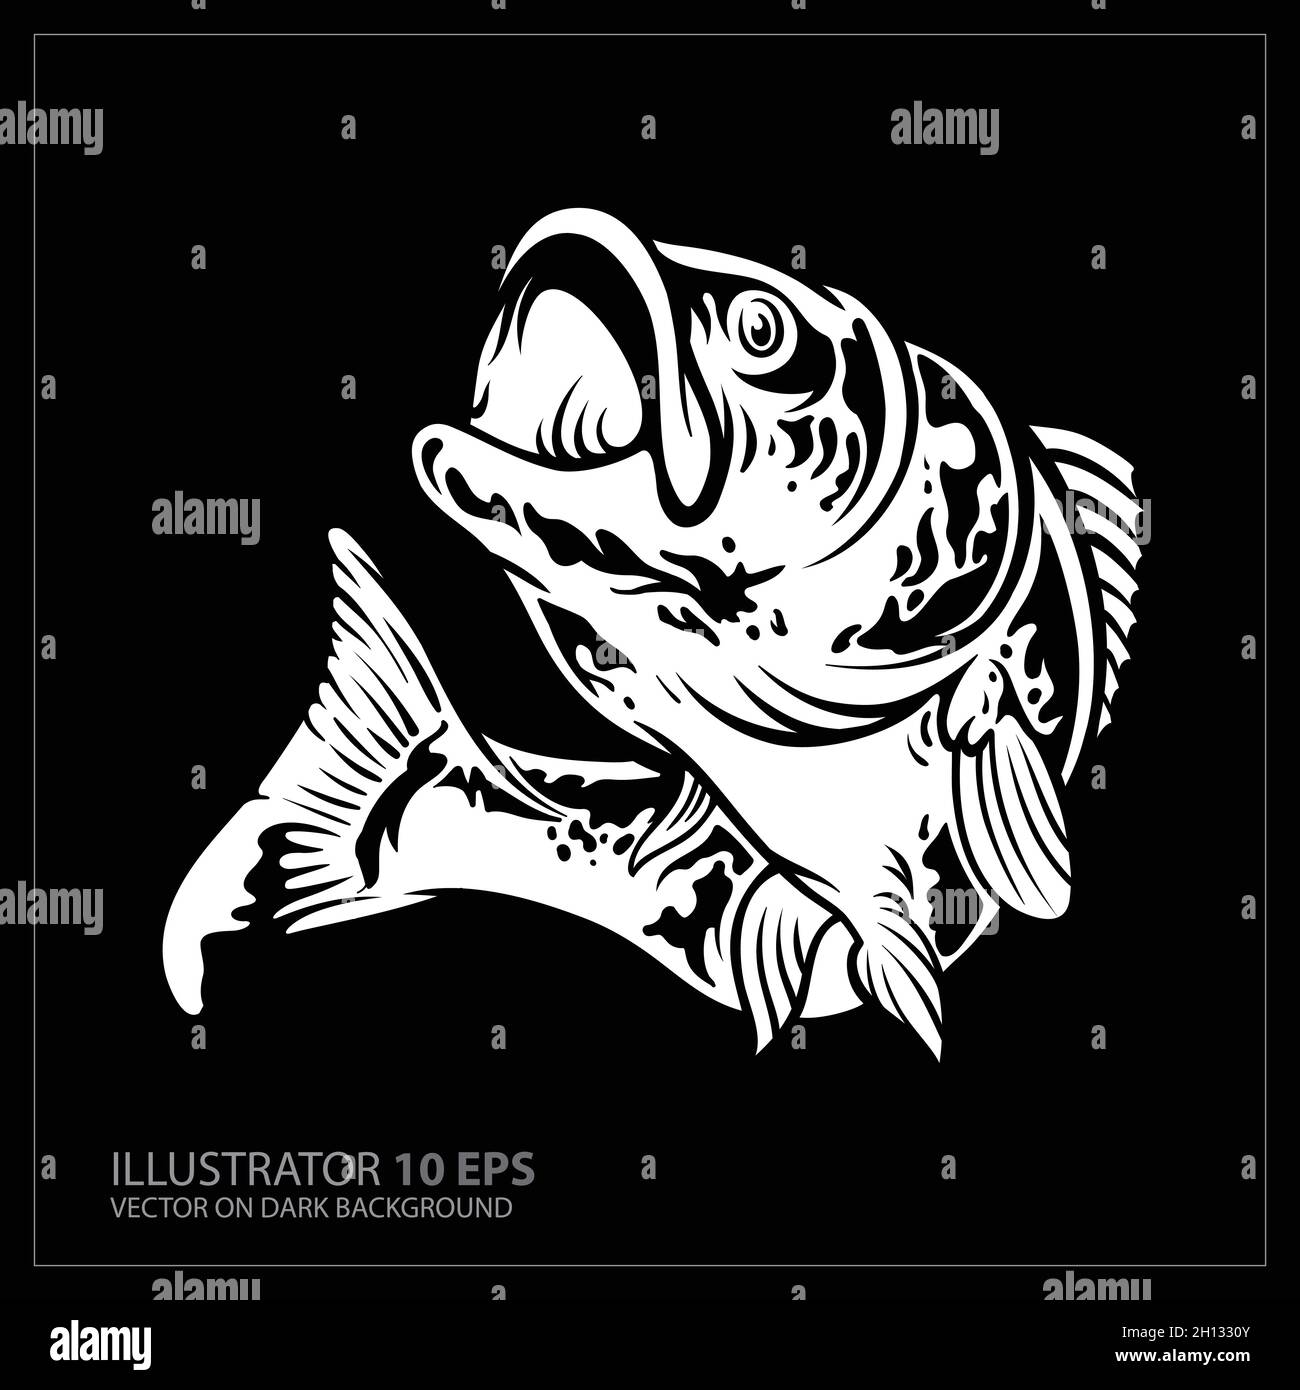 https://c8.alamy.com/comp/2H1330Y/vector-illustration-of-a-largemouth-bass-fish-jumping-in-black-background-done-in-retro-style-2H1330Y.jpg